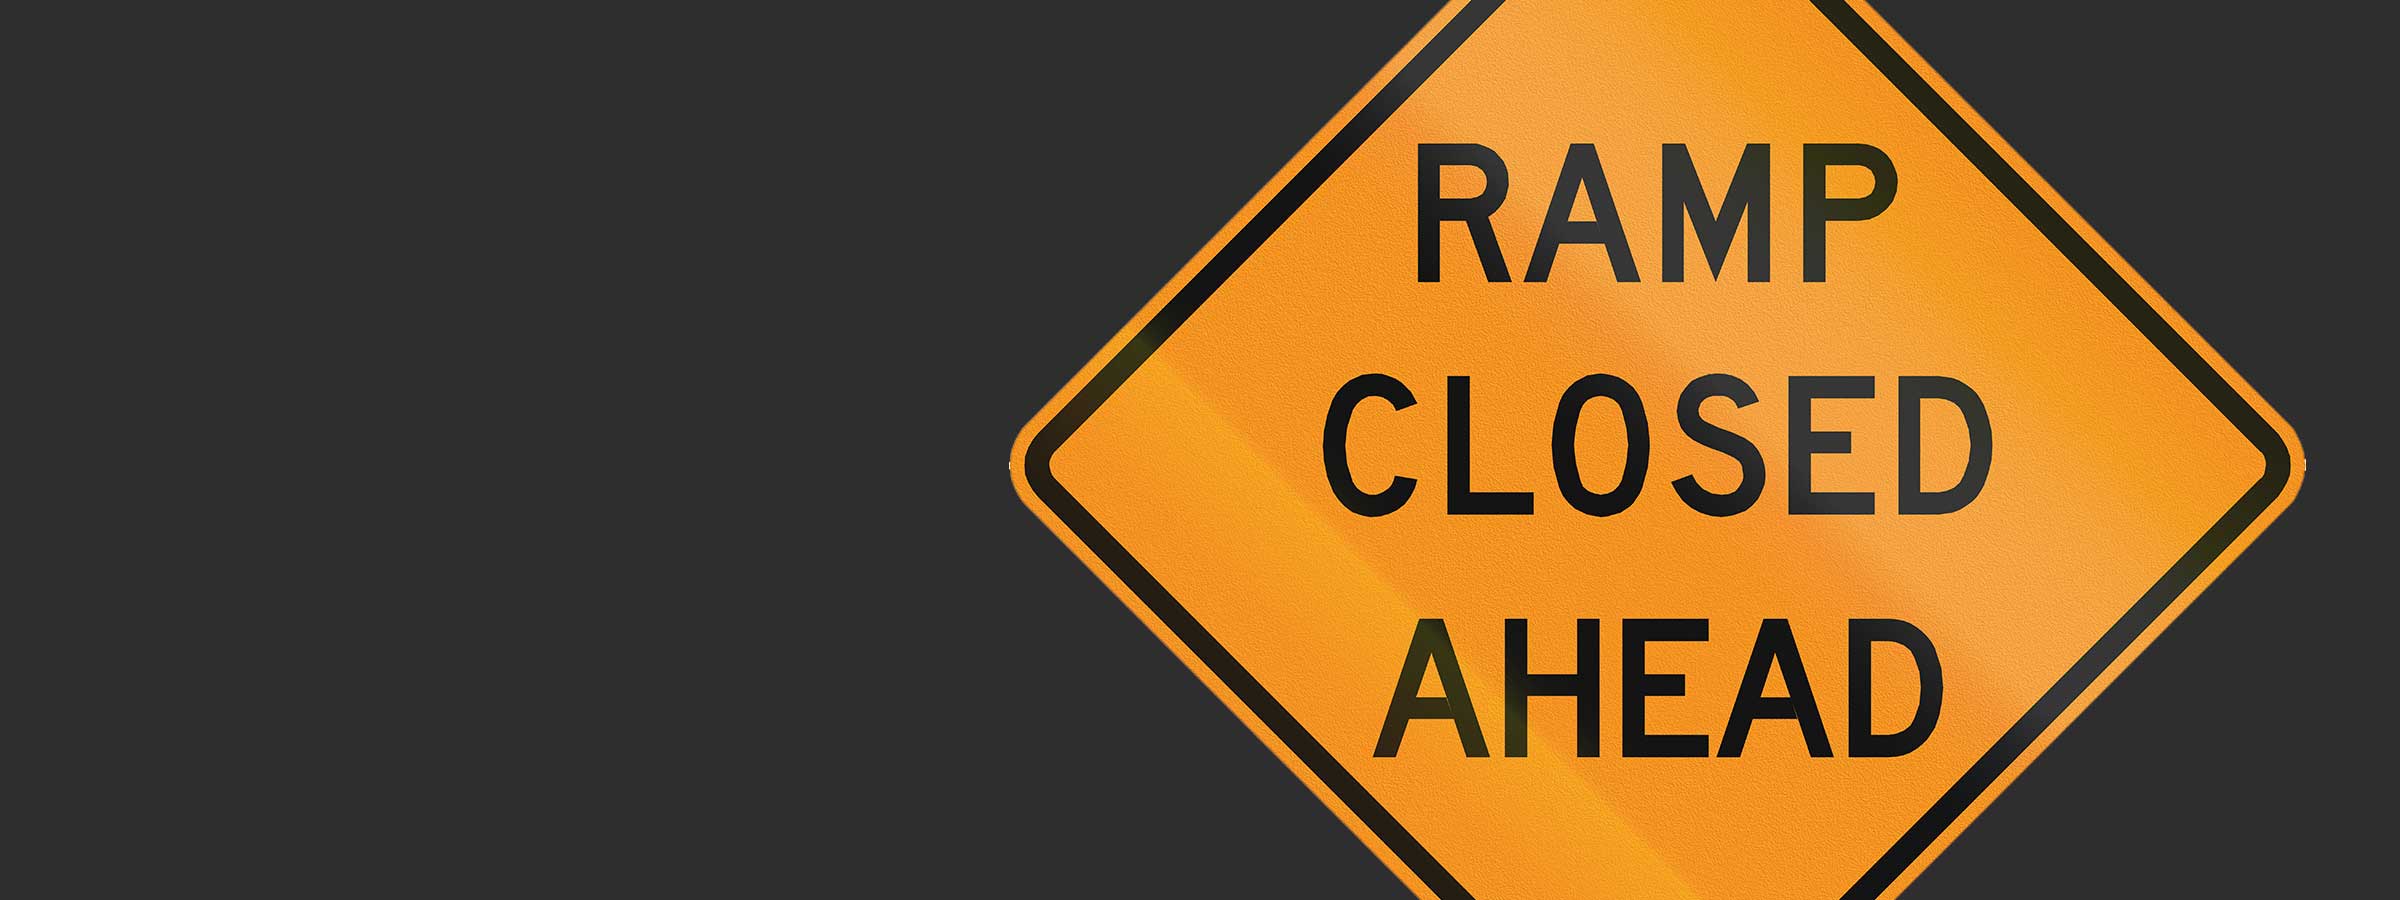 I-95 Northbound and Southbound Temporary Ramp Closures